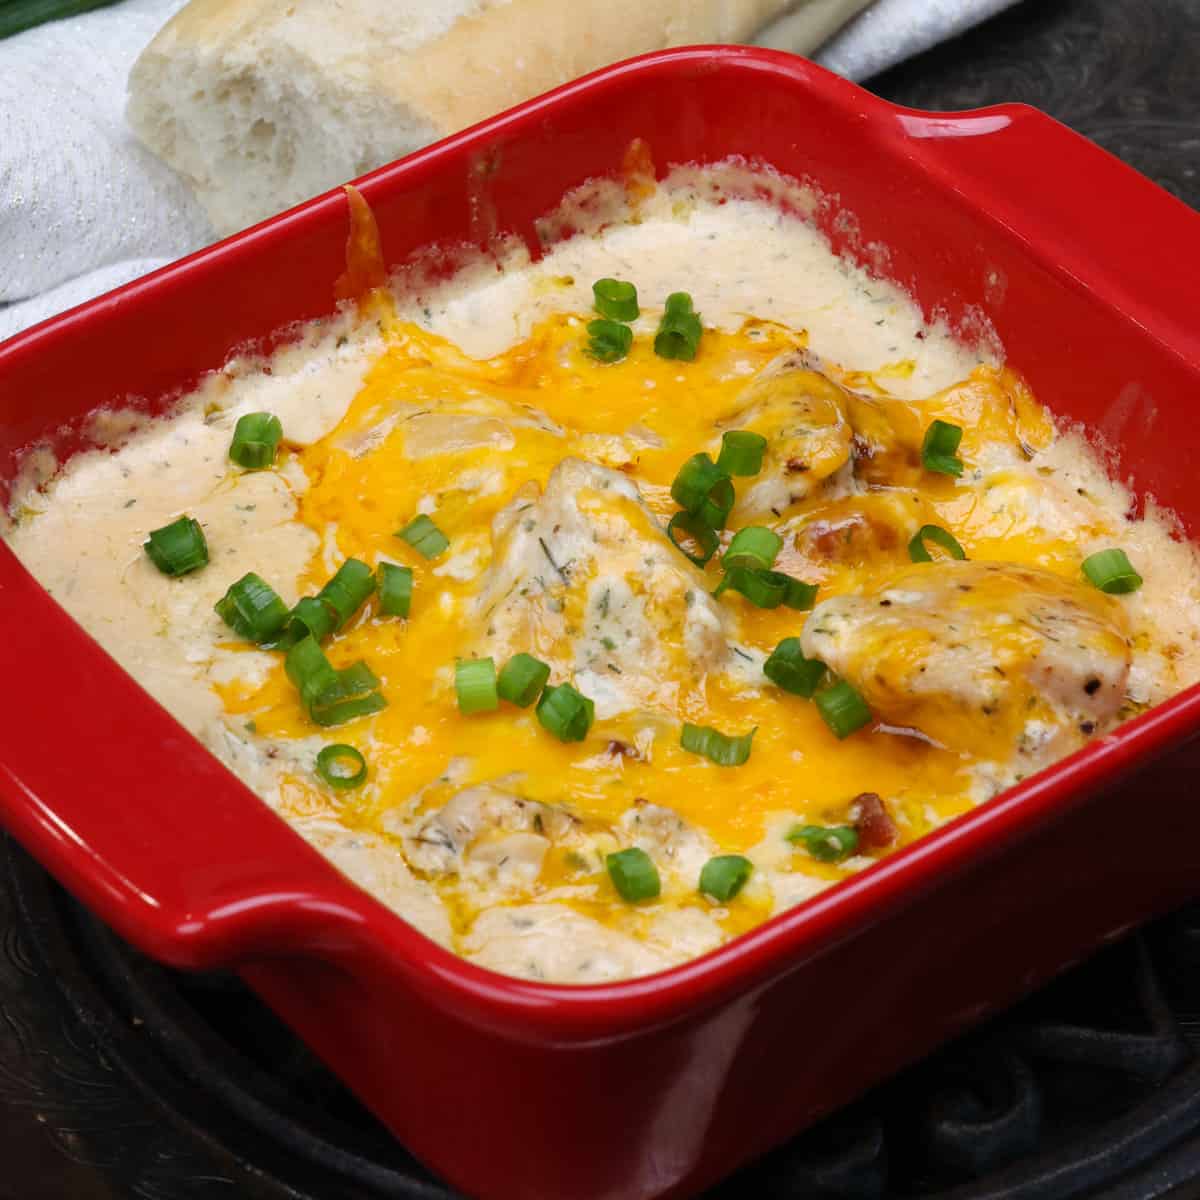 a small batch of crack chicken topped with melted cheese and chopped green onions.